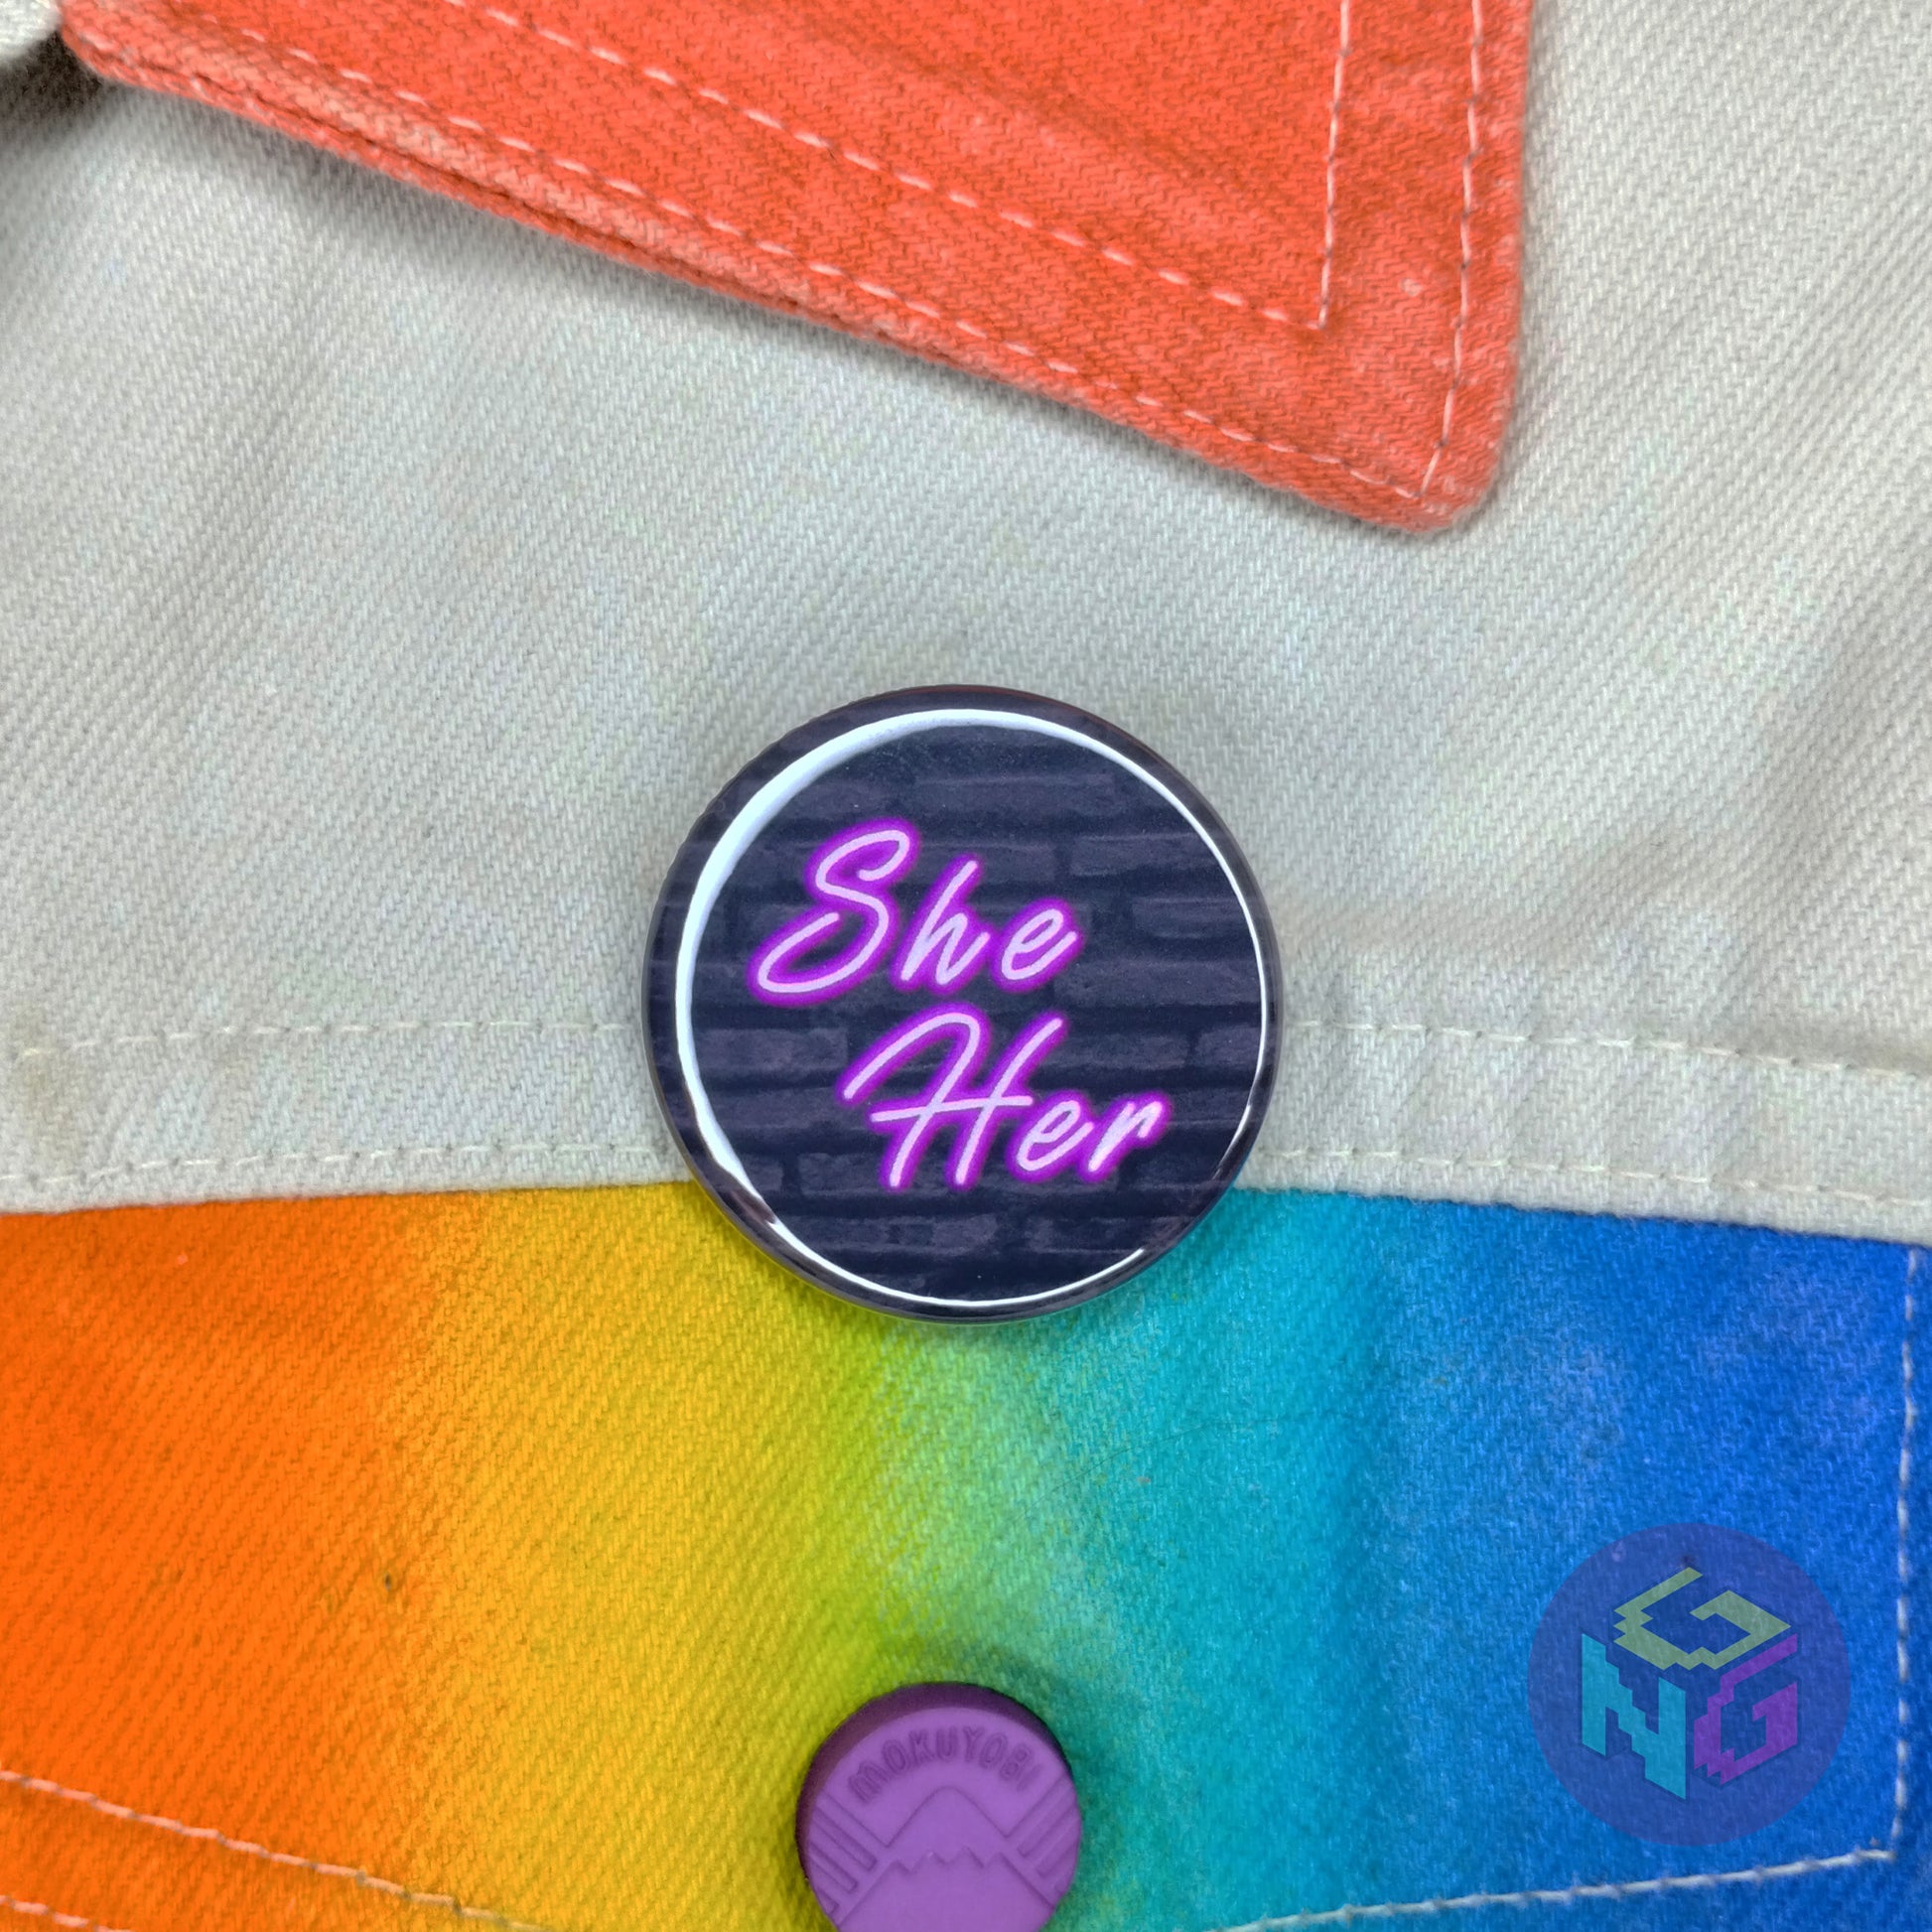 she her neon pronoun pin with pink glowing text on a dark brick. The pin is attached to a white denim jacket with rainbow accents